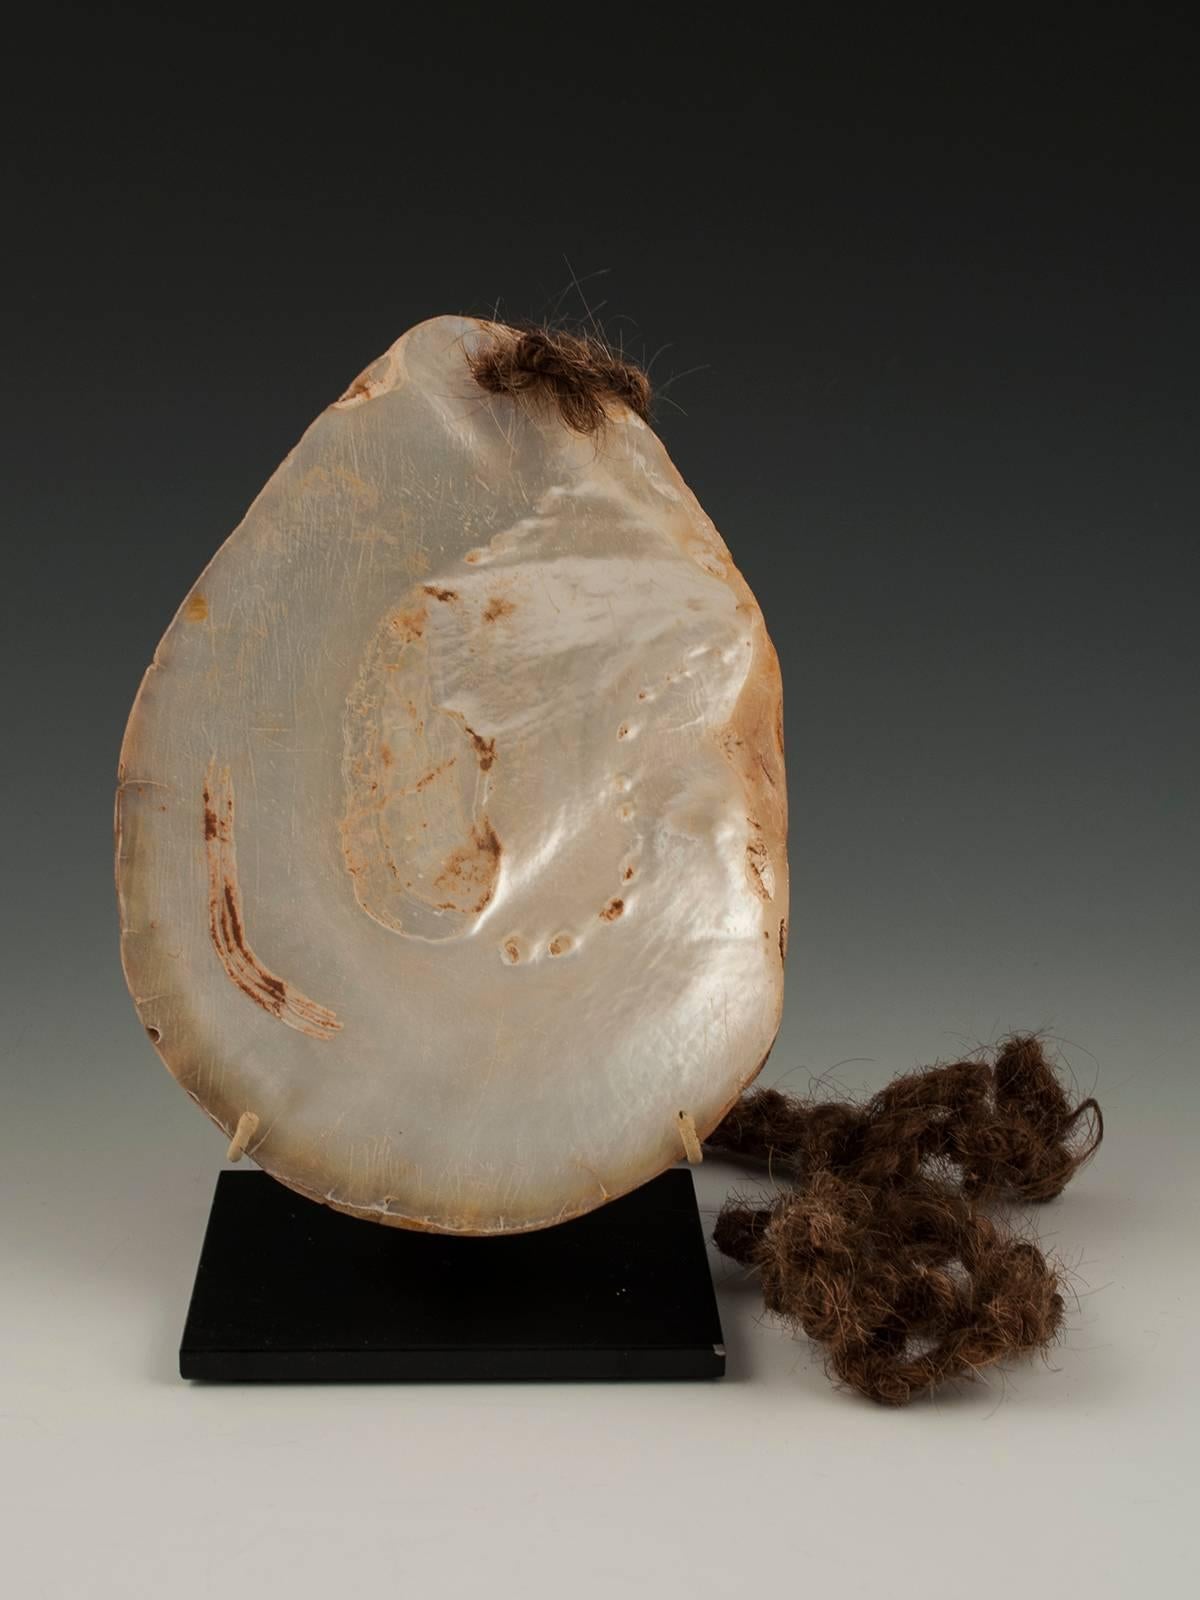 This is a luminous pearl shell pubic cover from the Kimberly area of Western Australia, worn by  men during certain ceremonies. It still has the human hair rope that wrapped around the man’s waist. On the left side is a symbolic incised line,